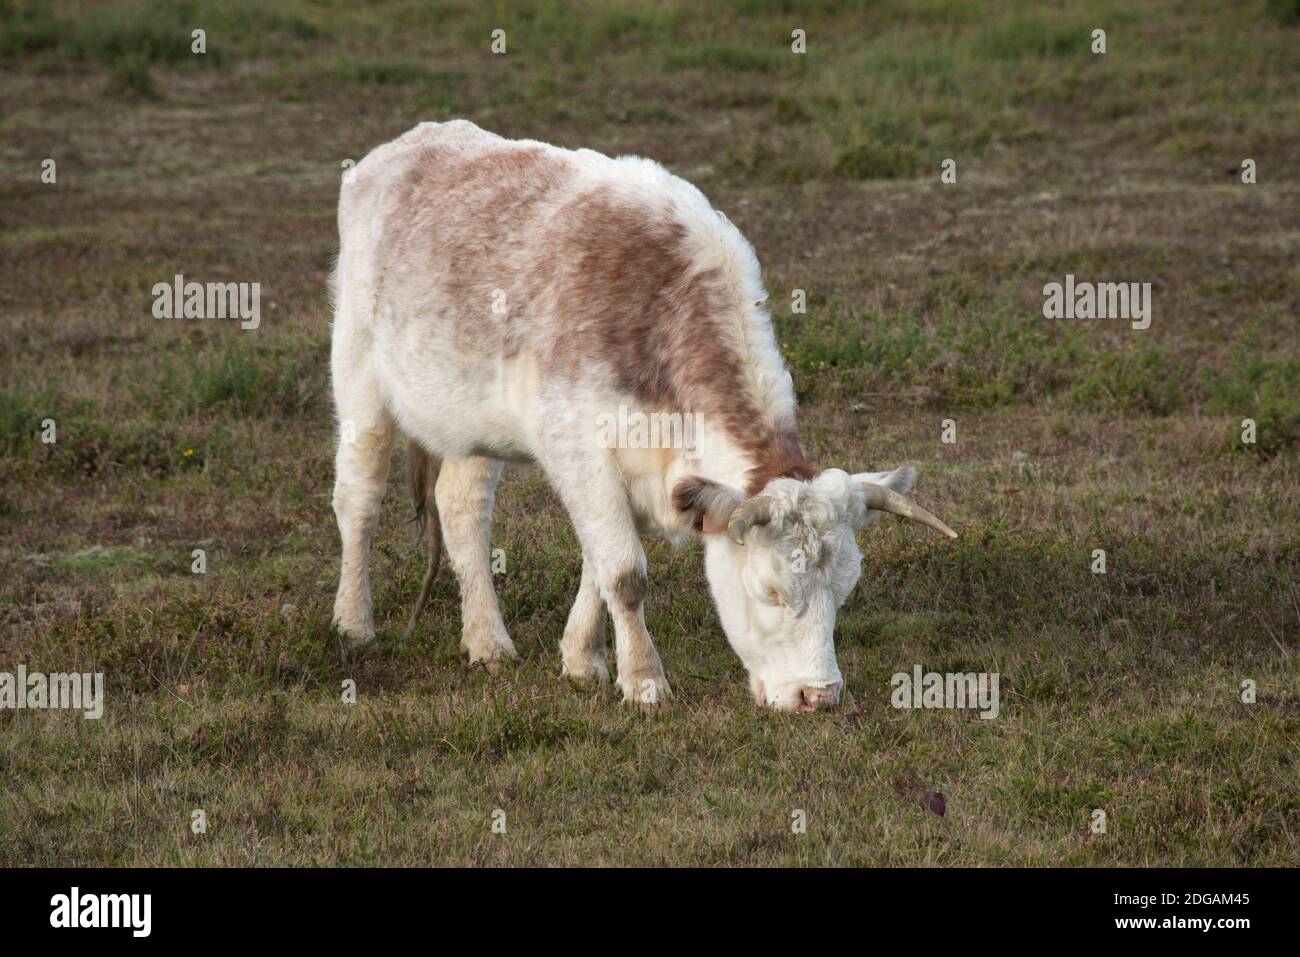 A beef steer grazing on Greenham Common BBOWT Nature Reserve to manage and conserve vegetation and grass, Newbury, Berkshire, November Stock Photo